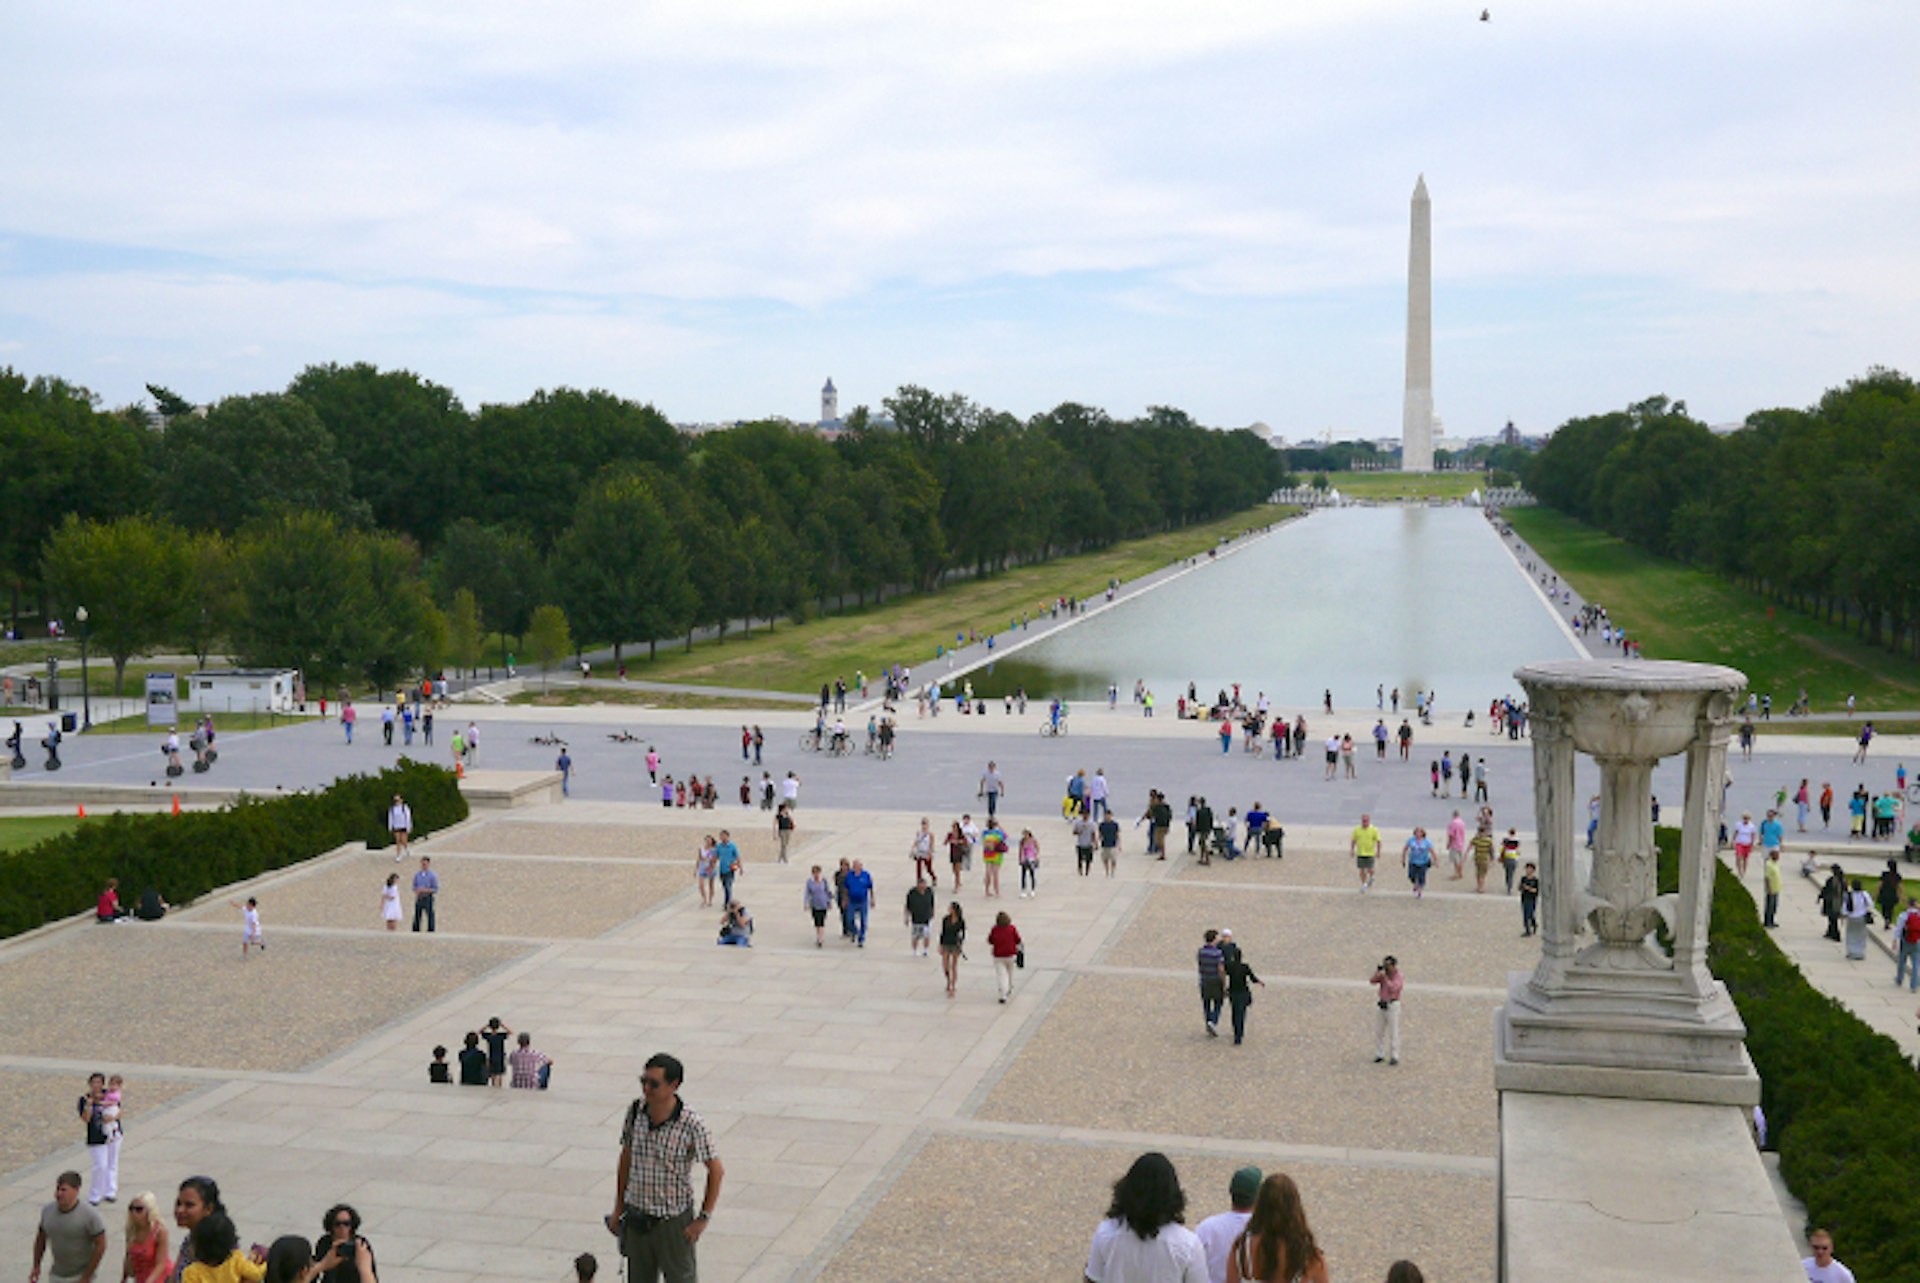 Find your cycling legs on the monument-strewn National Mall. Image by Kārlis Dambrāns / CC BY 2.0